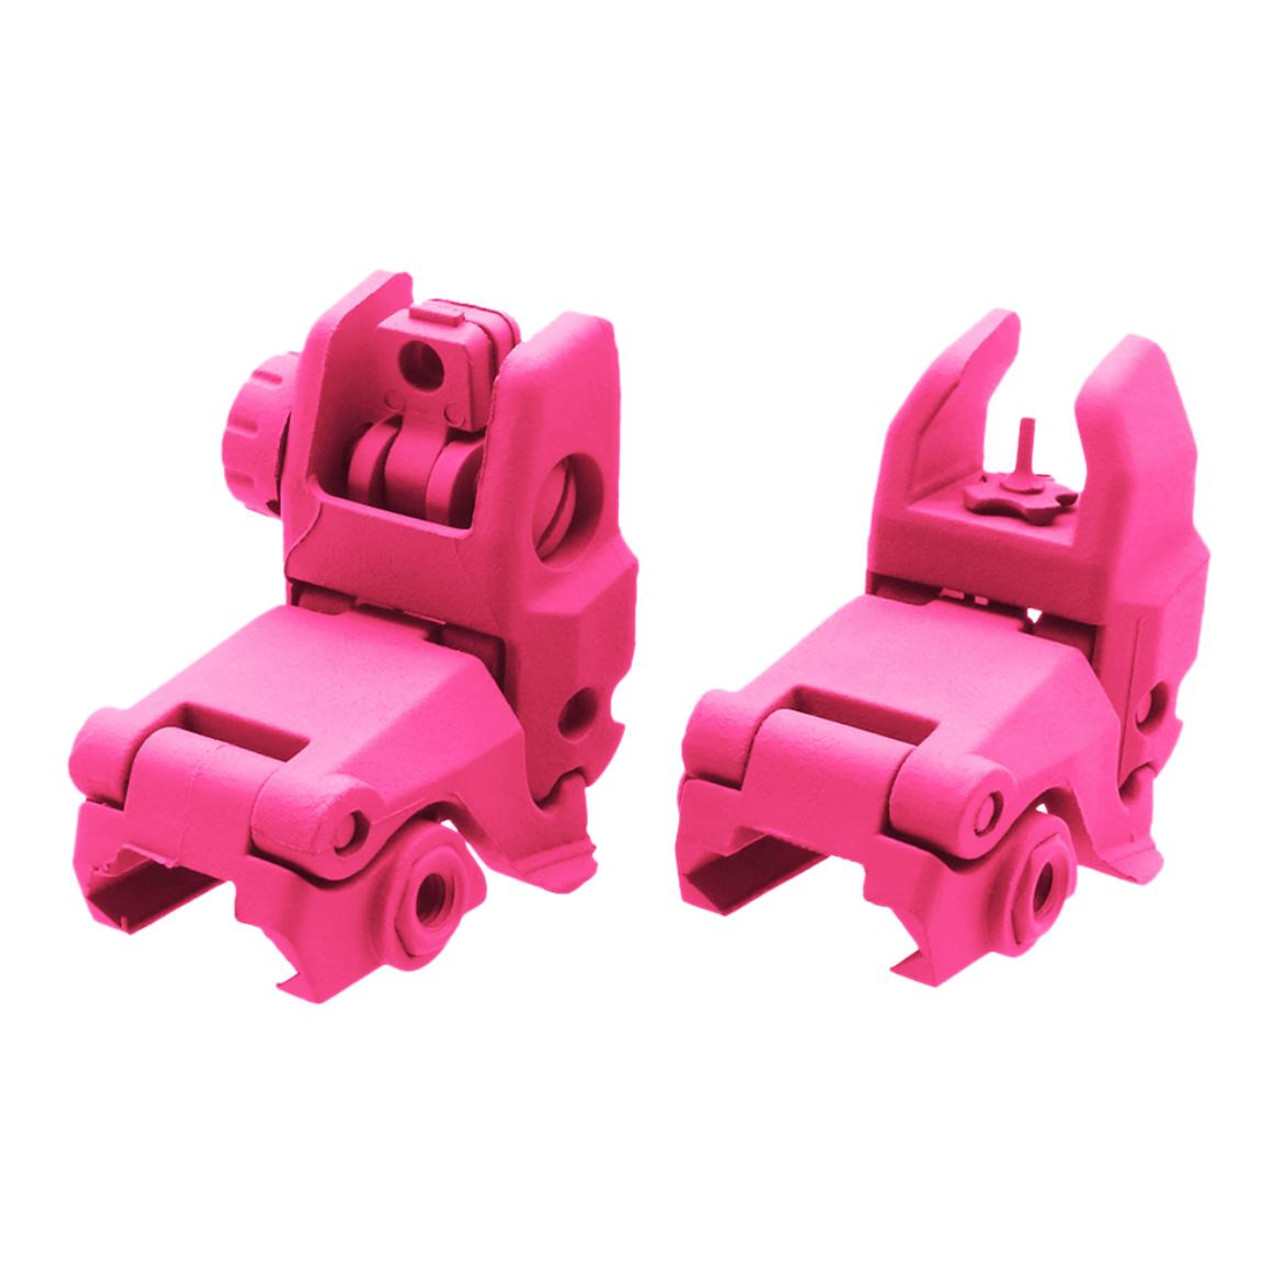 MCS Polymer Front and Rear Sight Spring Loaded Cerakote Pink 